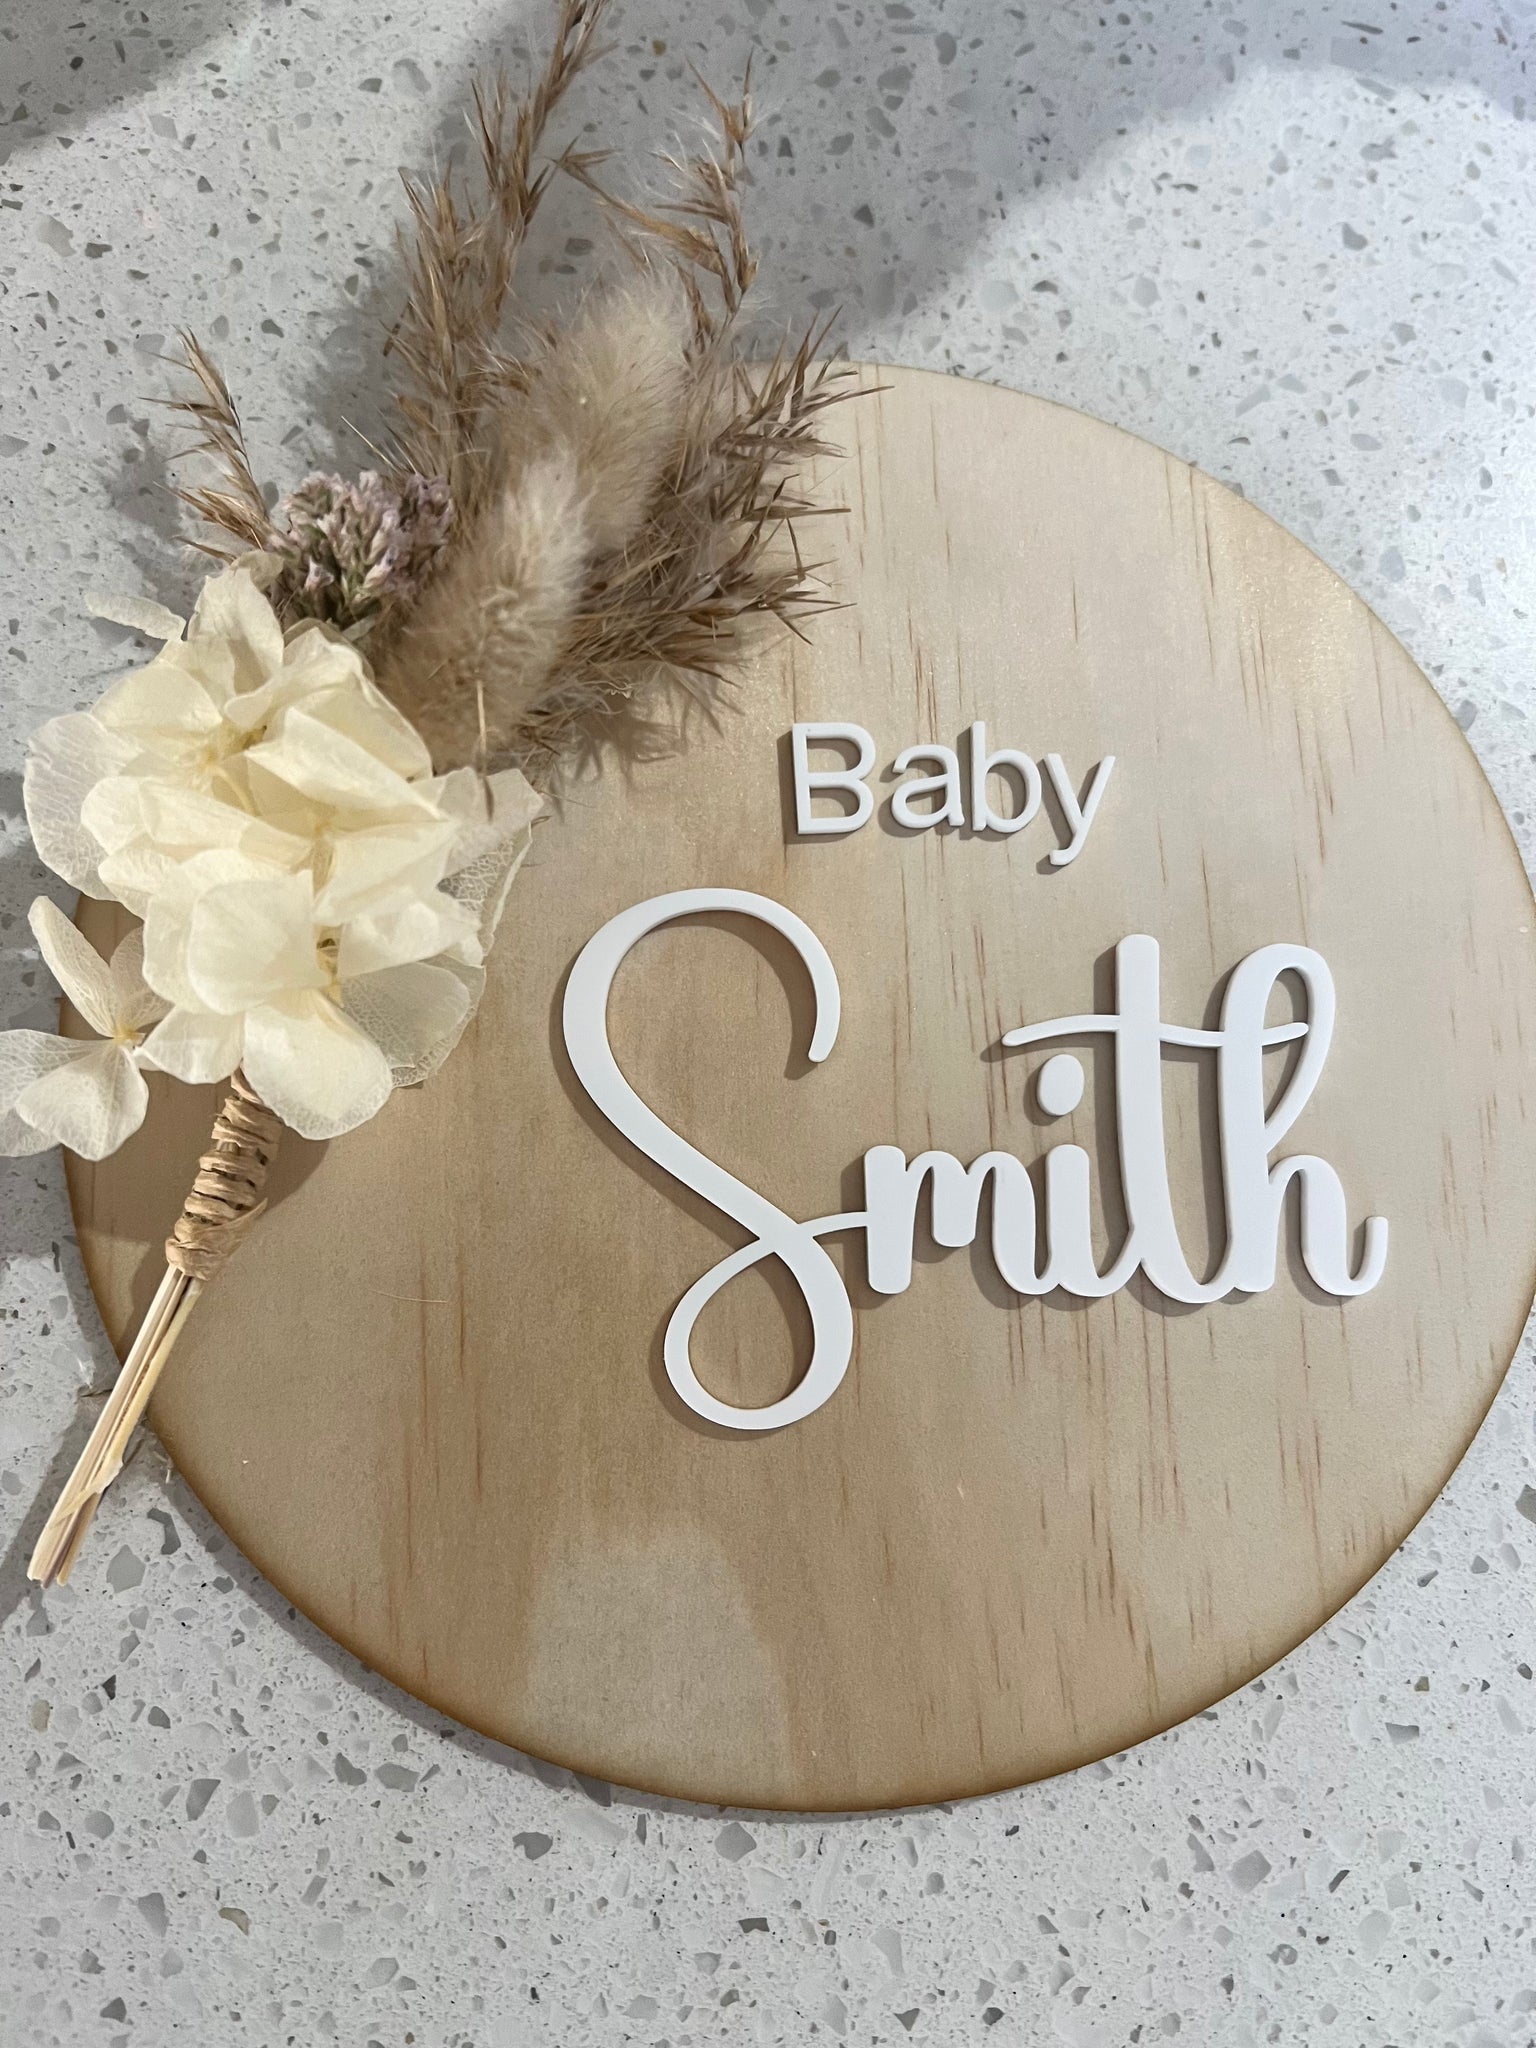 Baby announcement plaque with floral